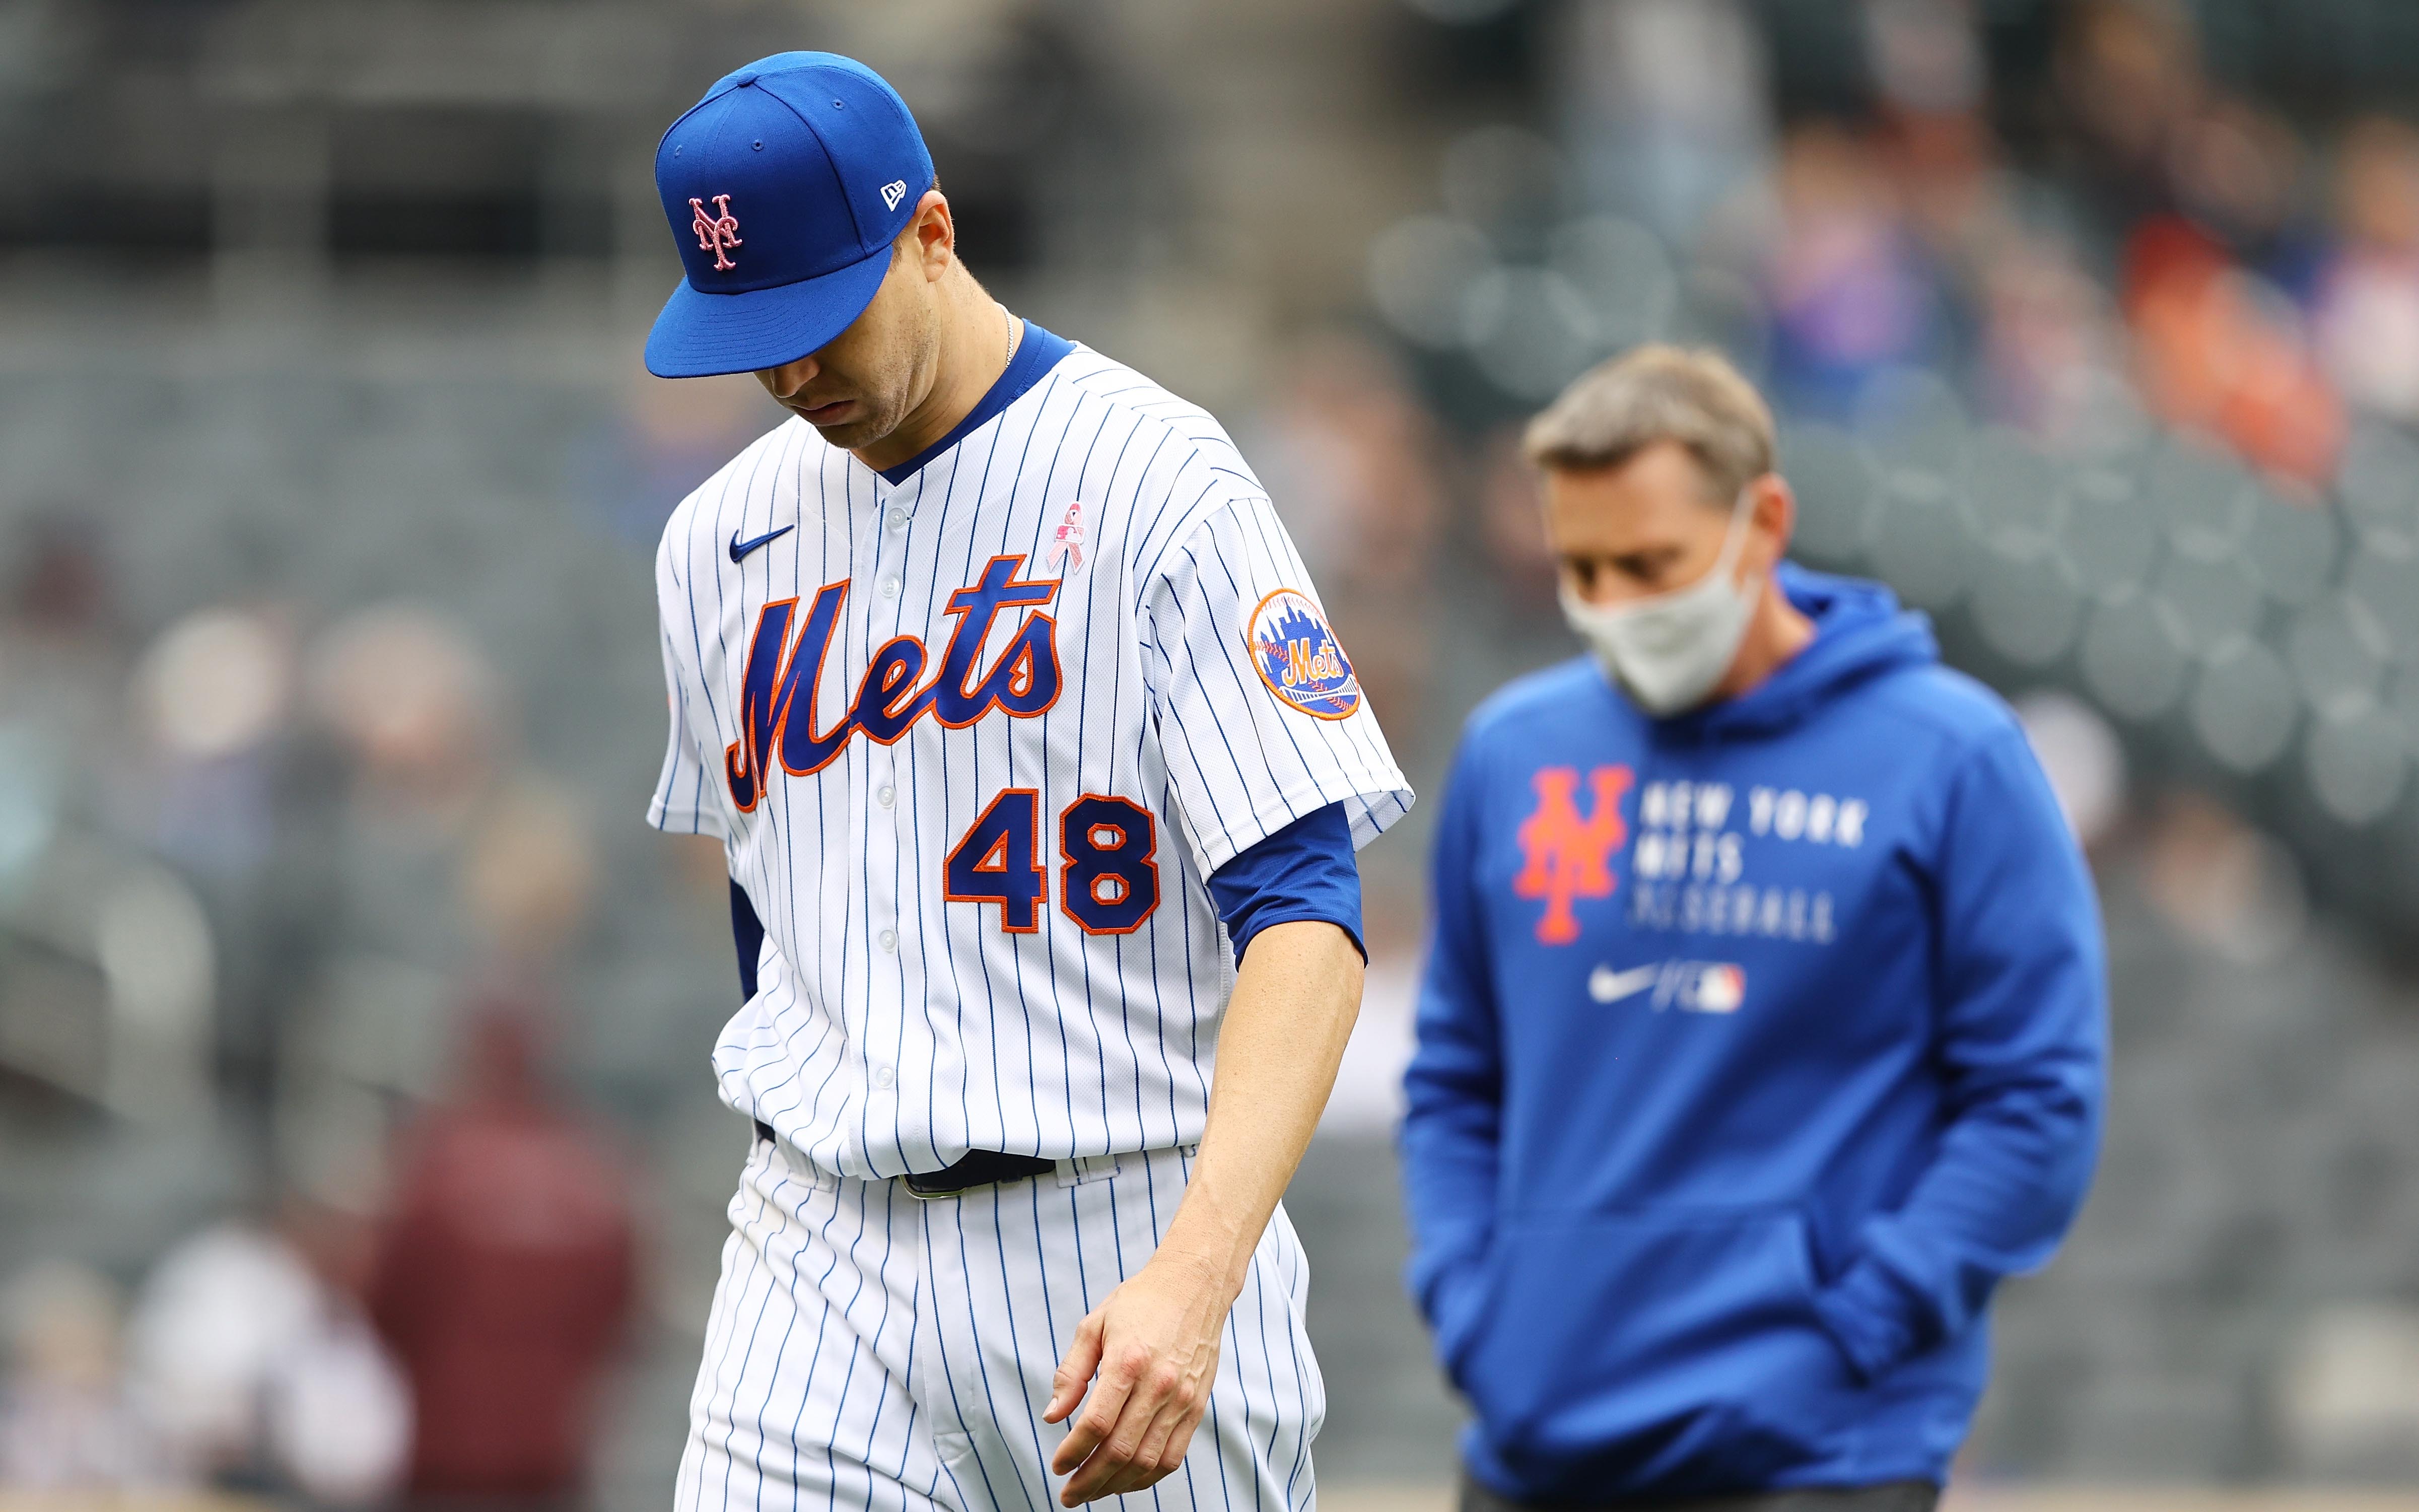 Mets injury update: Jacob deGrom to IL with forearm tightness - Amazin'  Avenue